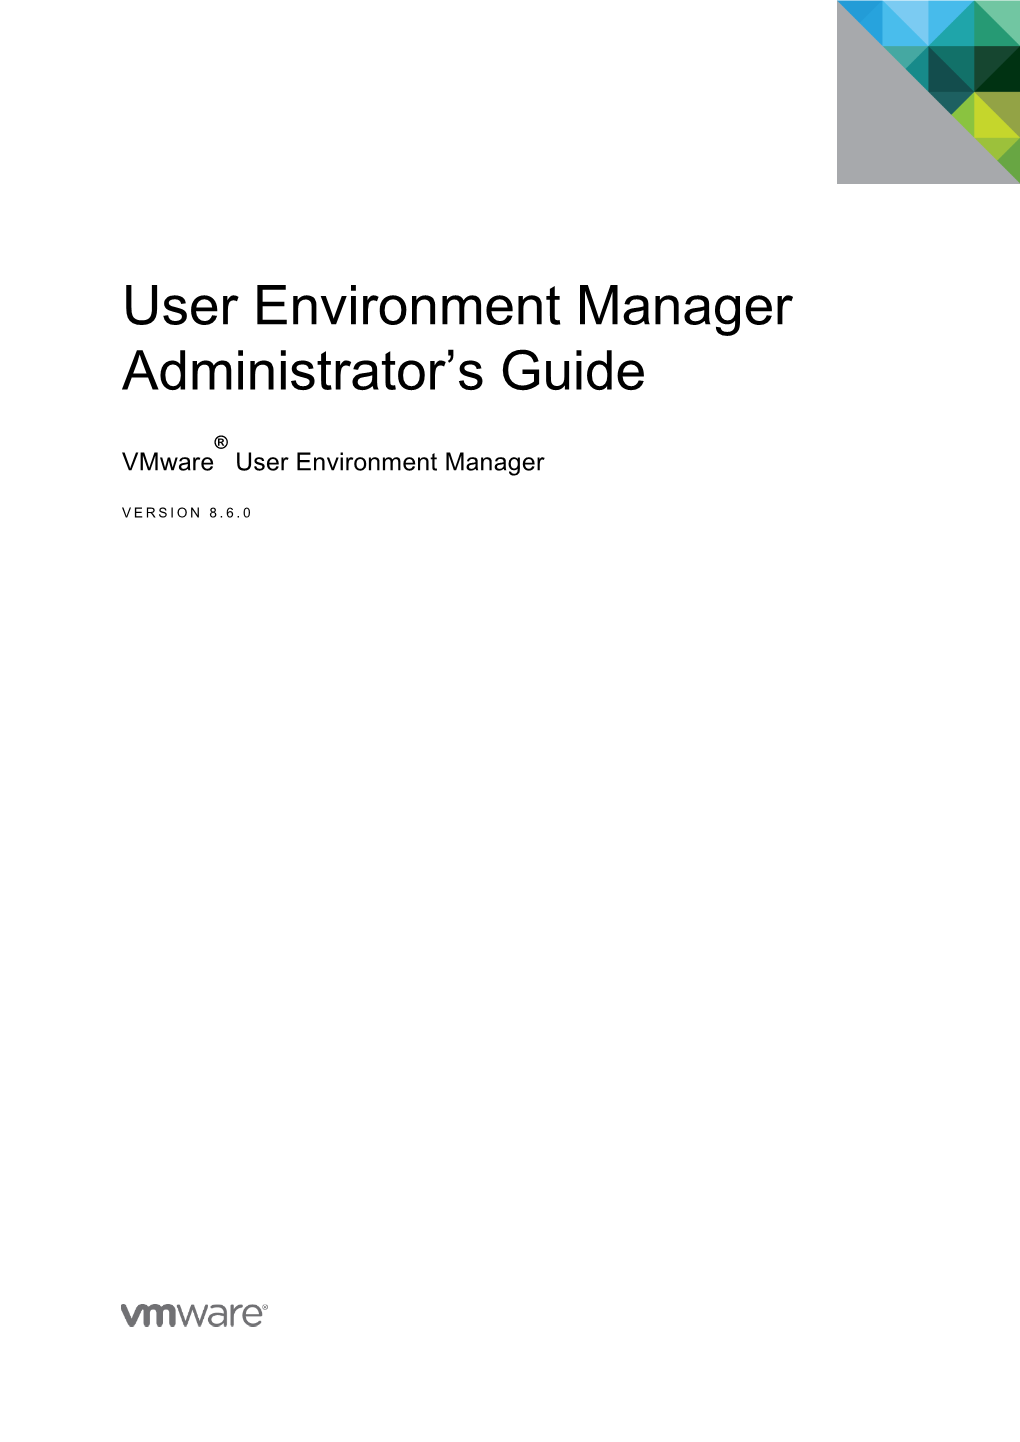 Vmware User Environment Manager Administrator's Guide